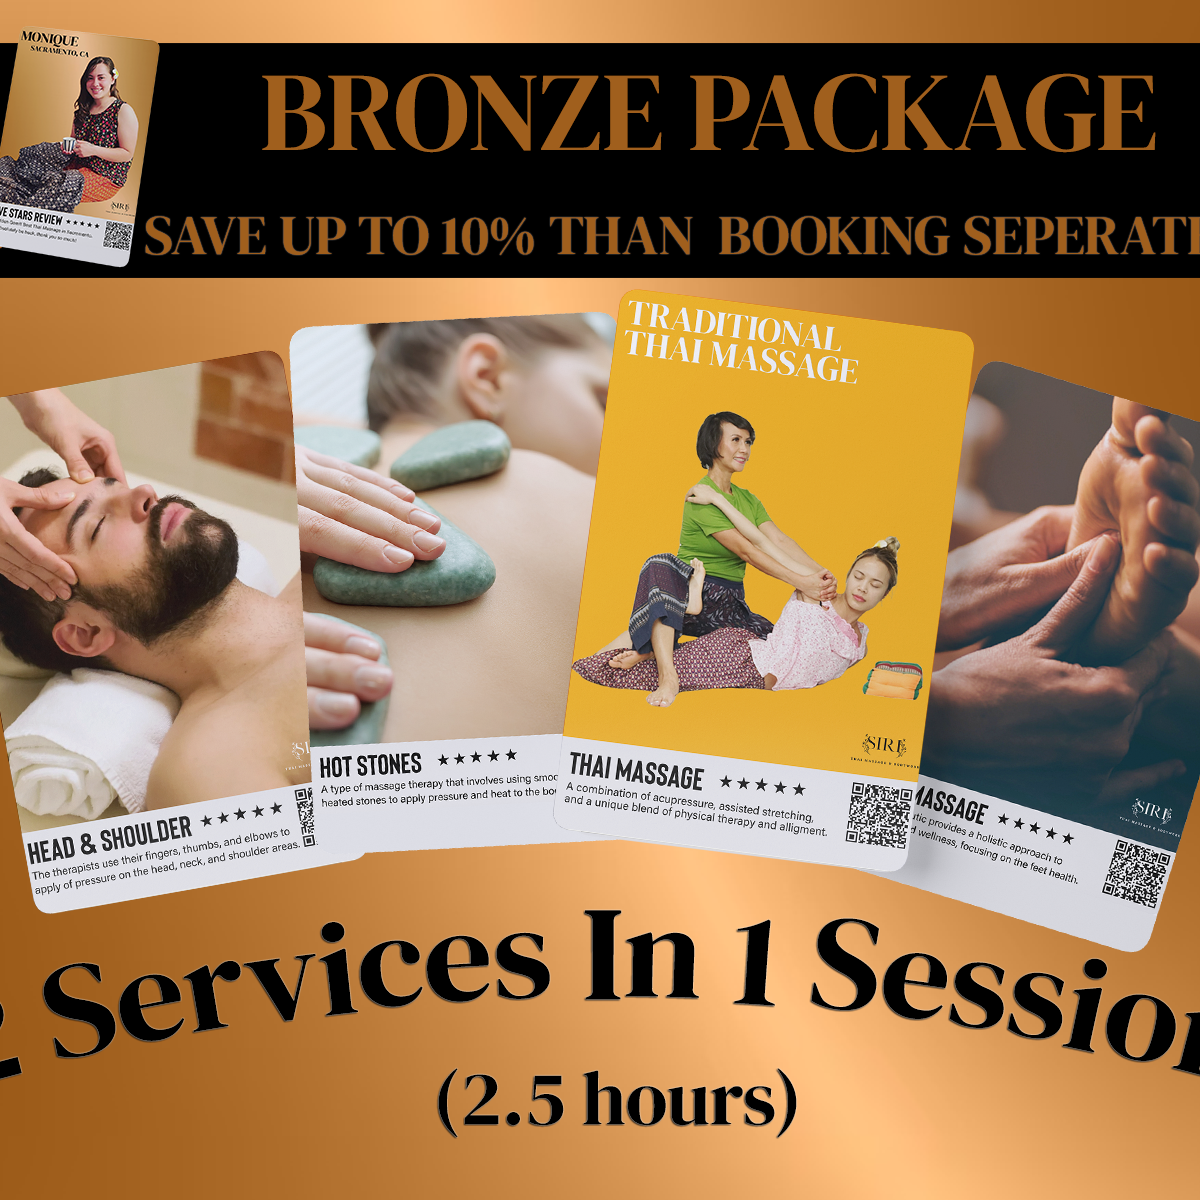 Bronze Package Massage (2 Services in 1 Session)